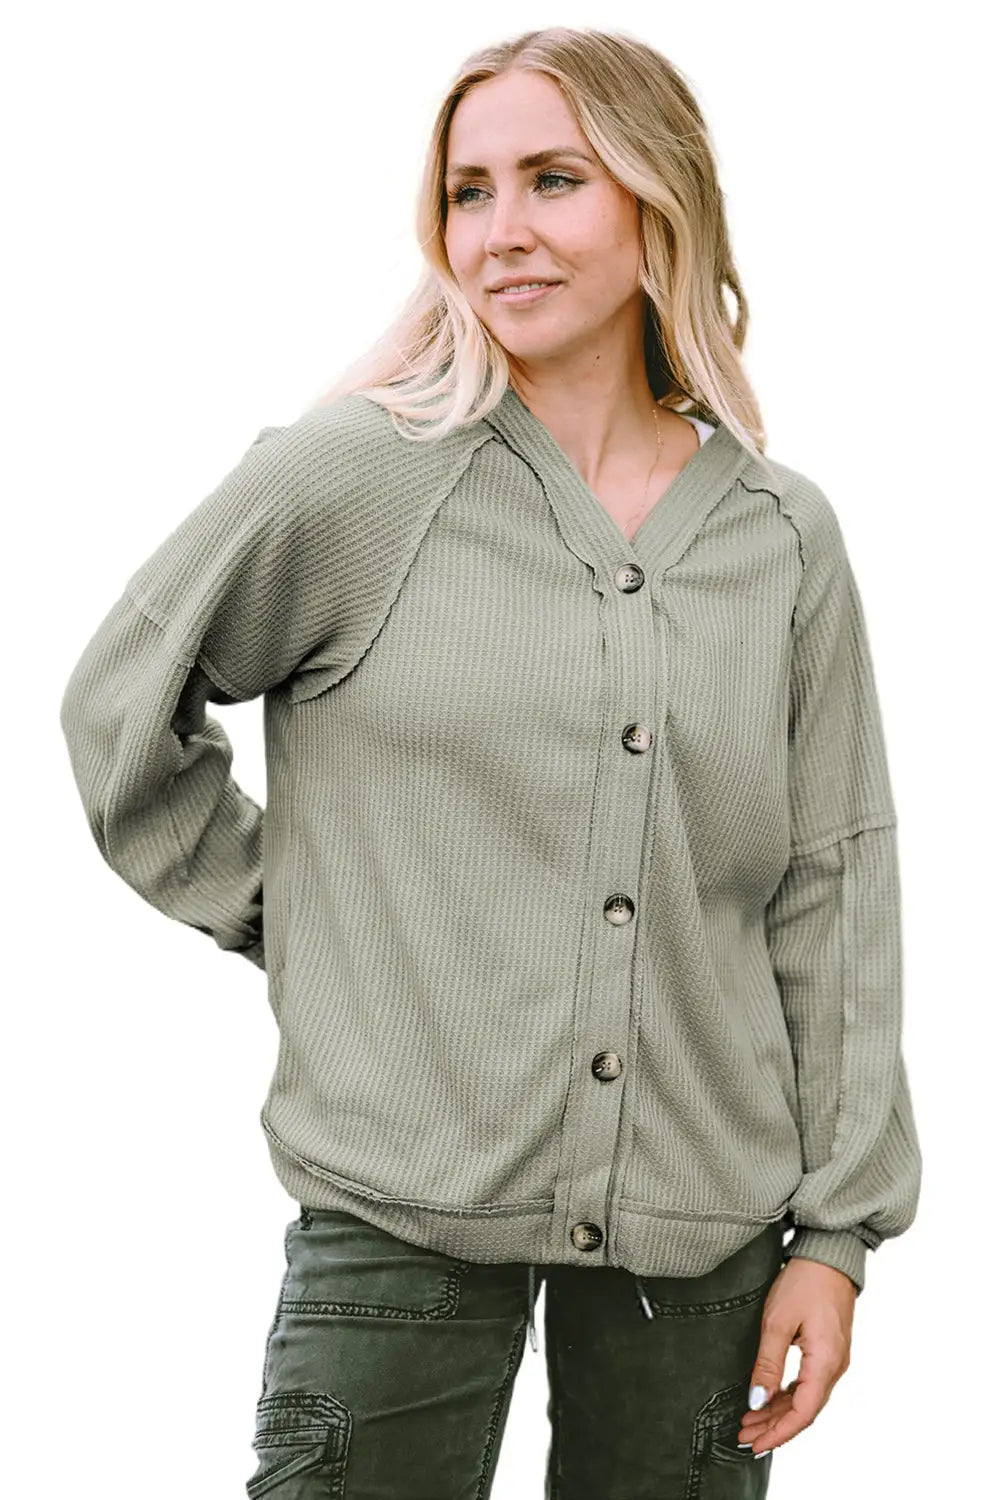 Khaki exposed seam buttons front waffle knit cardigan - sweaters & cardigans